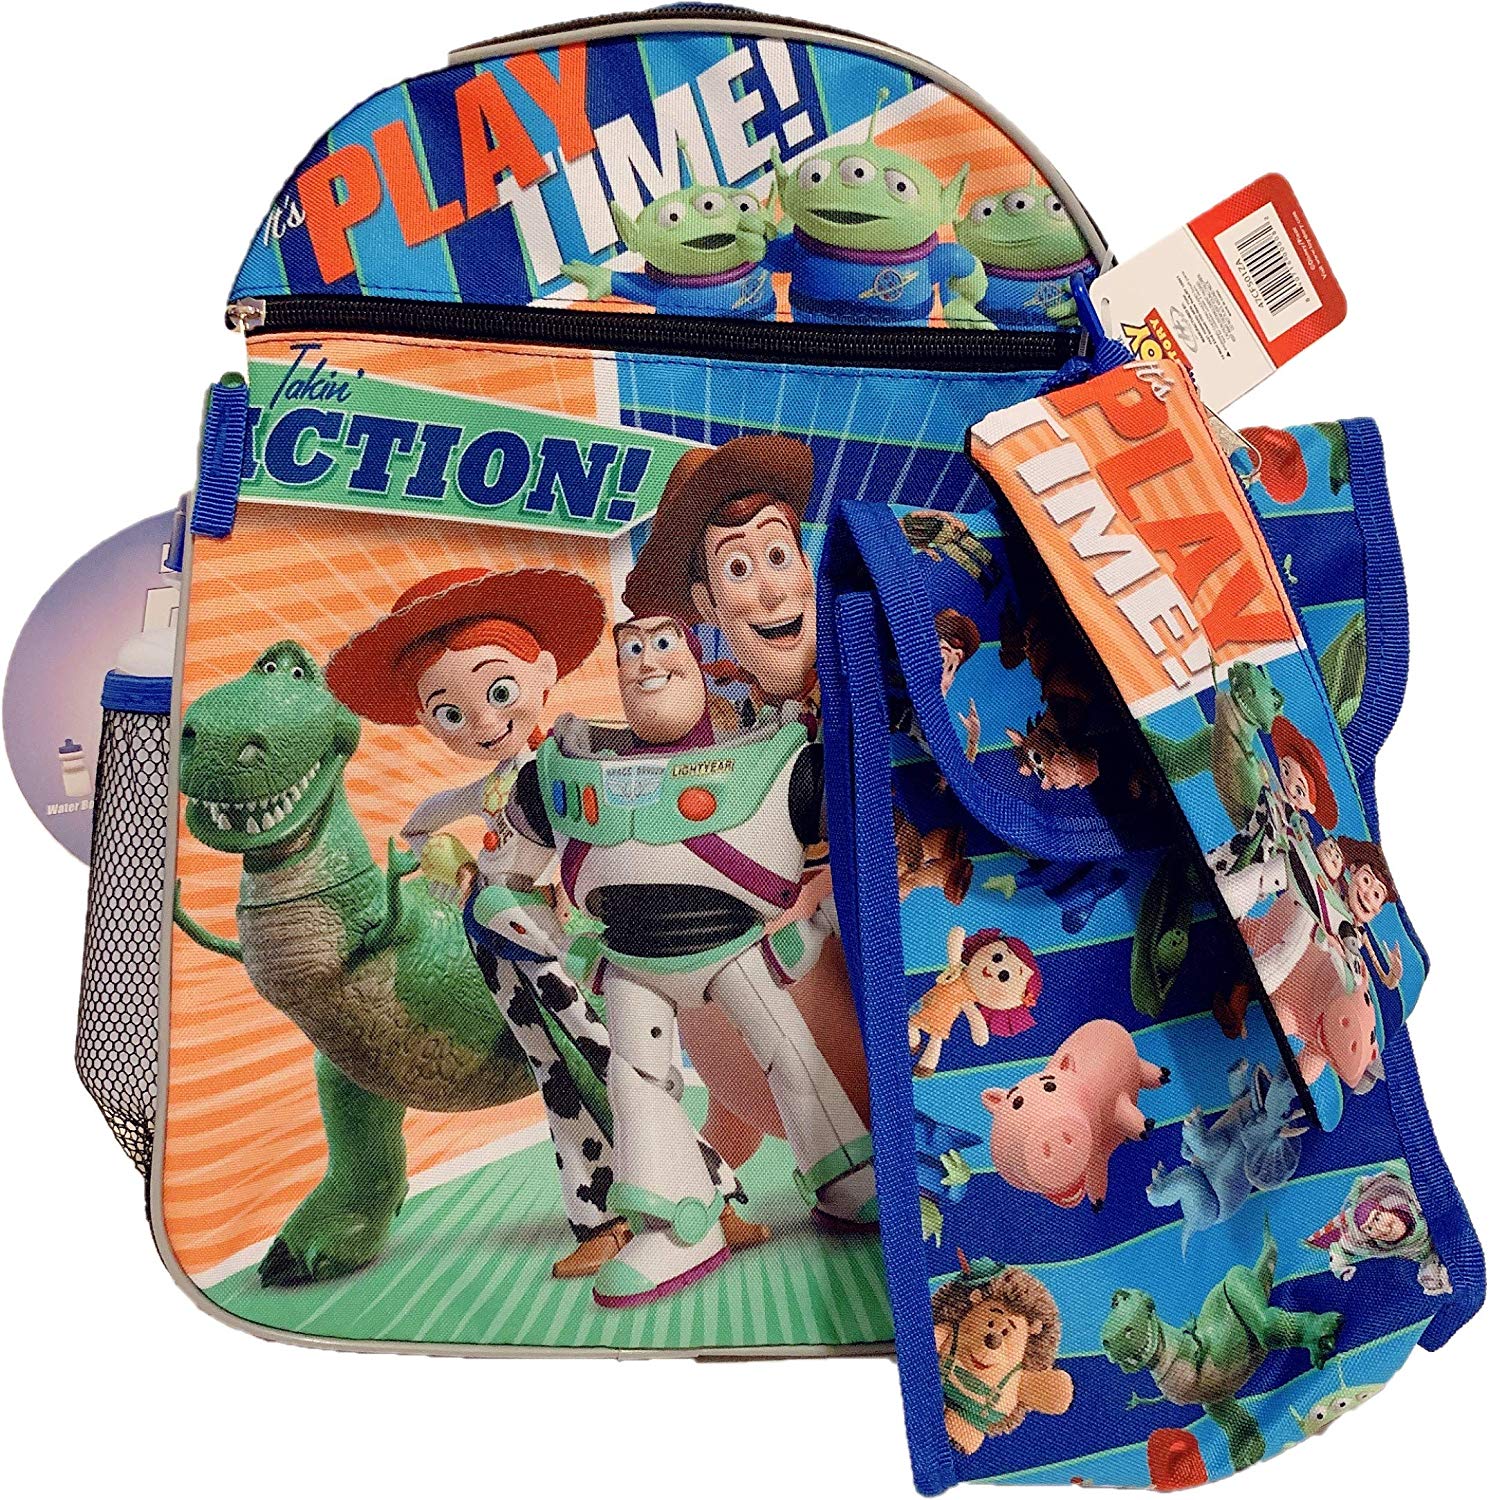 Disney Toy Story 5 Piece Backpack Water Bottle Accessory Set - image 1 of 1